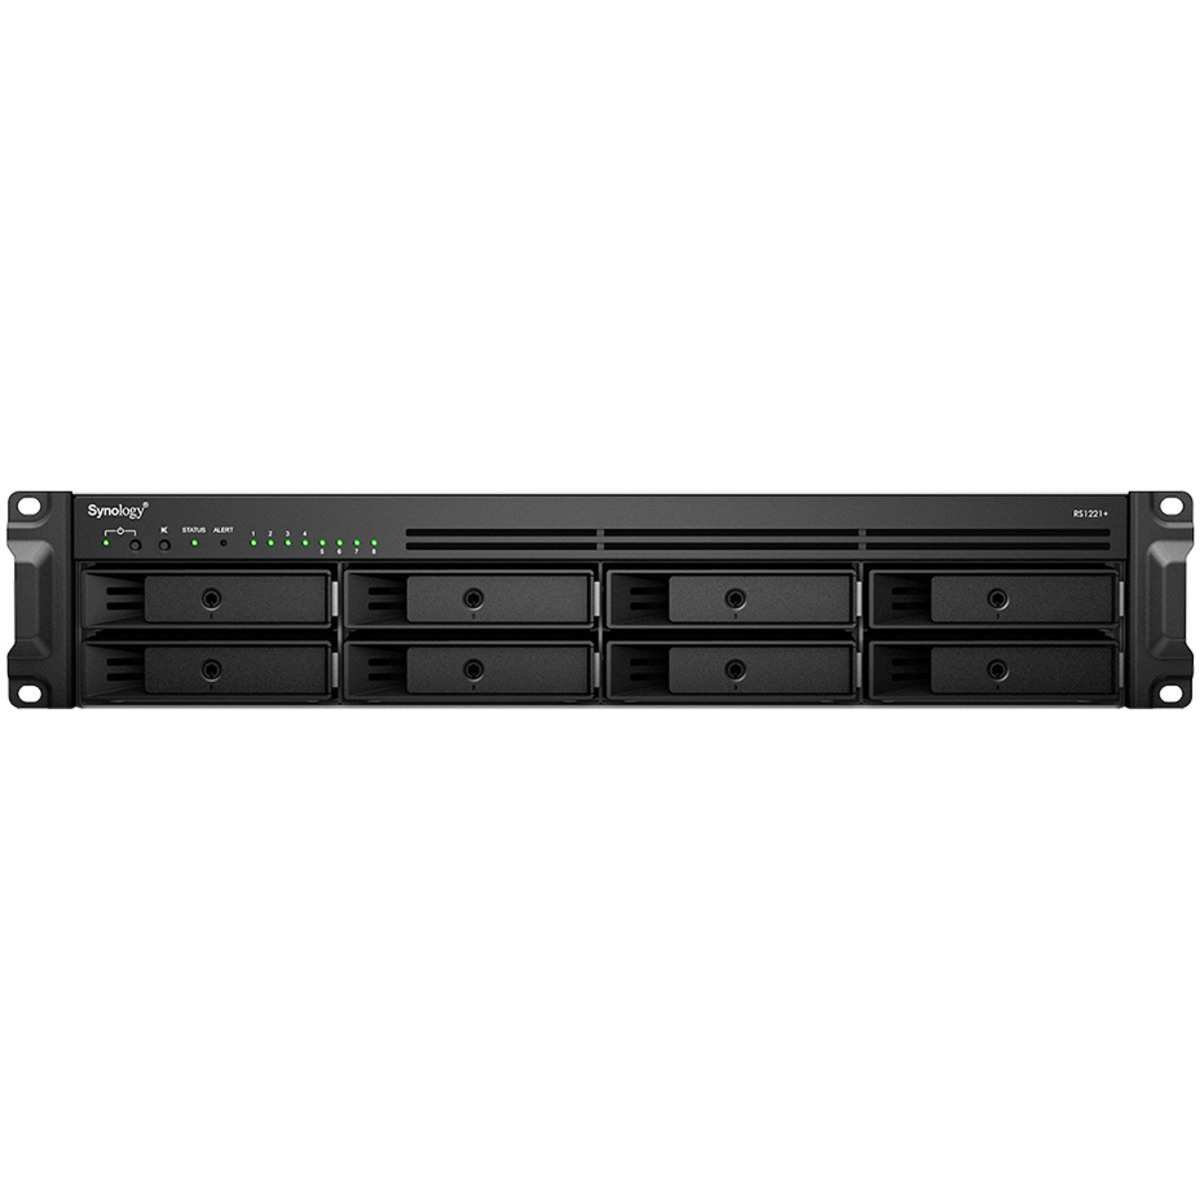 Synology RackStation RS1221RP+ 70tb 8-Bay RackMount Multimedia / Power User / Business NAS - Network Attached Storage Device 7x10tb Western Digital Gold WD102KRYZ 3.5 7200rpm SATA 6Gb/s HDD ENTERPRISE Class Drives Installed - Burn-In Tested - FREE RAM UPGRADE RackStation RS1221RP+